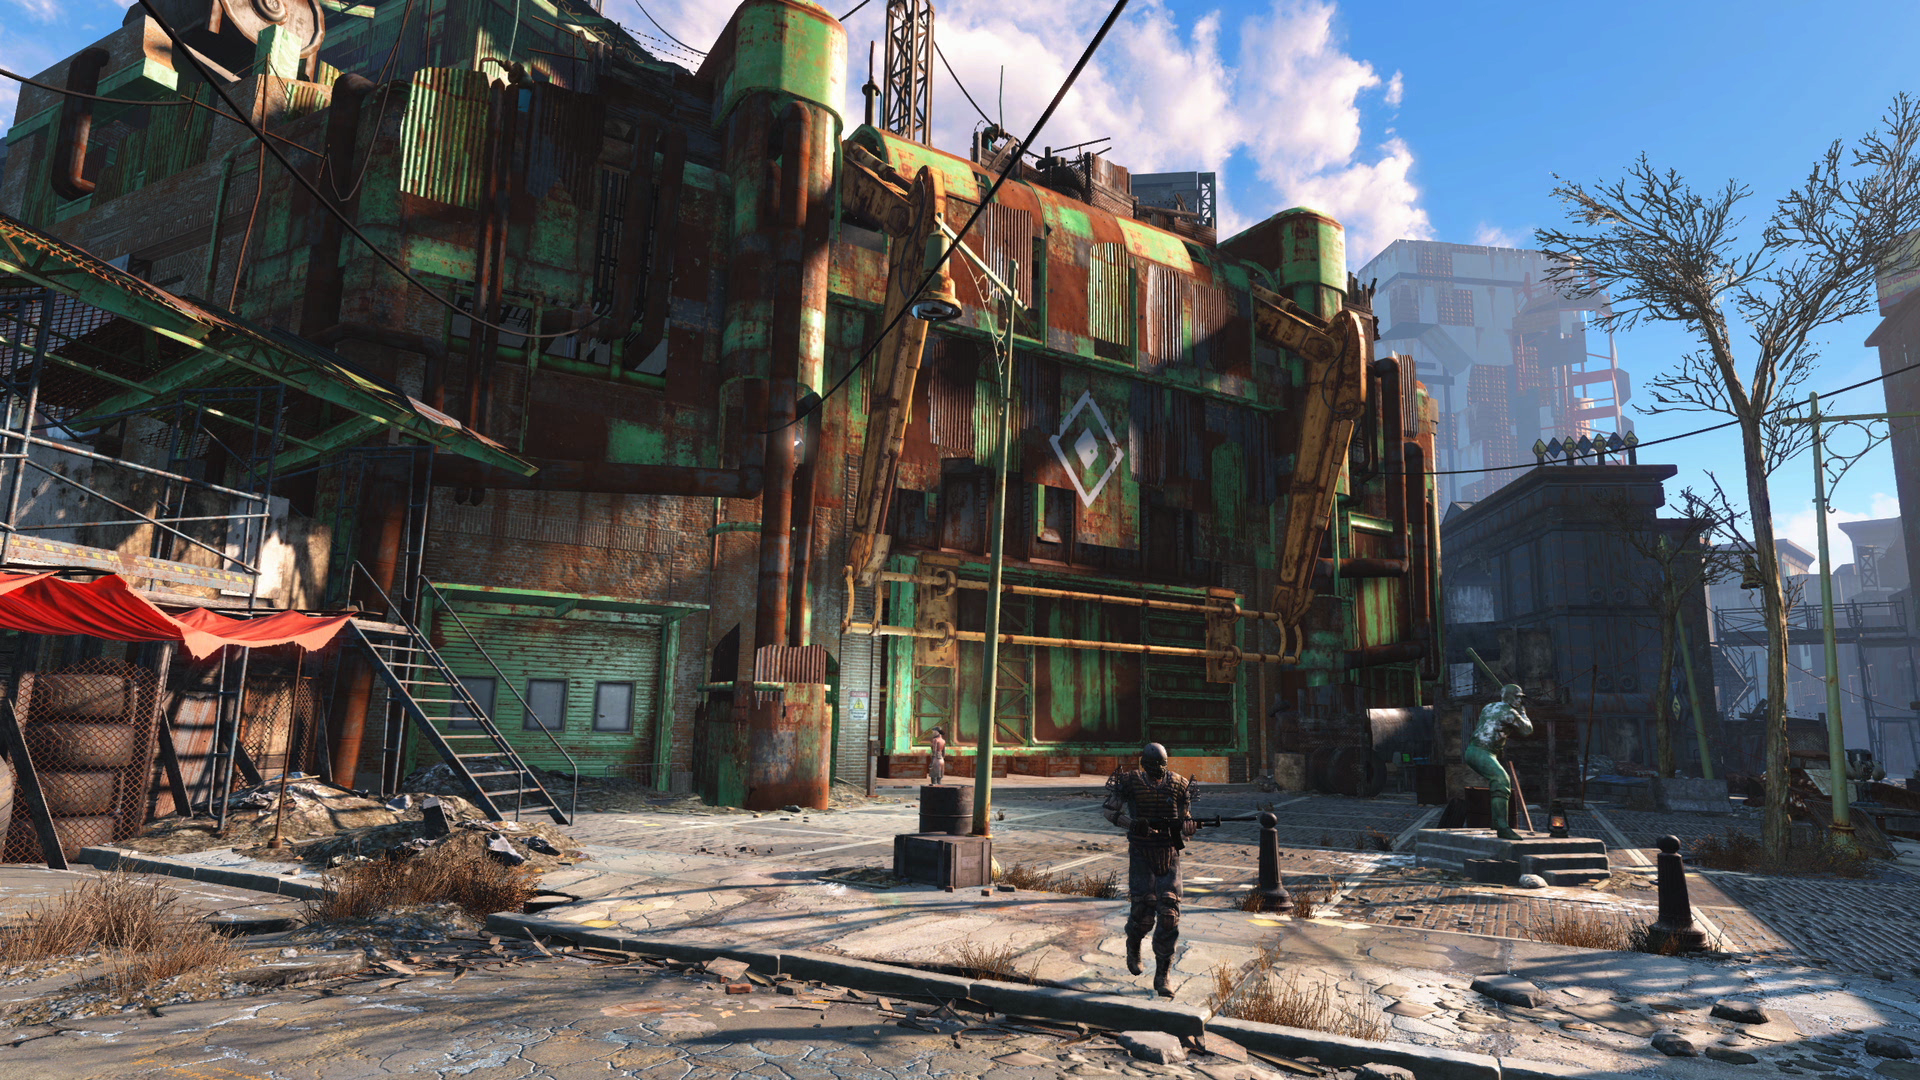 Media asset in full size related to 3dfxzone.it news item entitled as follows: Primi trailer e screenshot ufficiali in Full HD del game Fallout 4 di Bethesda | Image Name: news22682_Bethesda-Fallout-4-screenshot_8.png